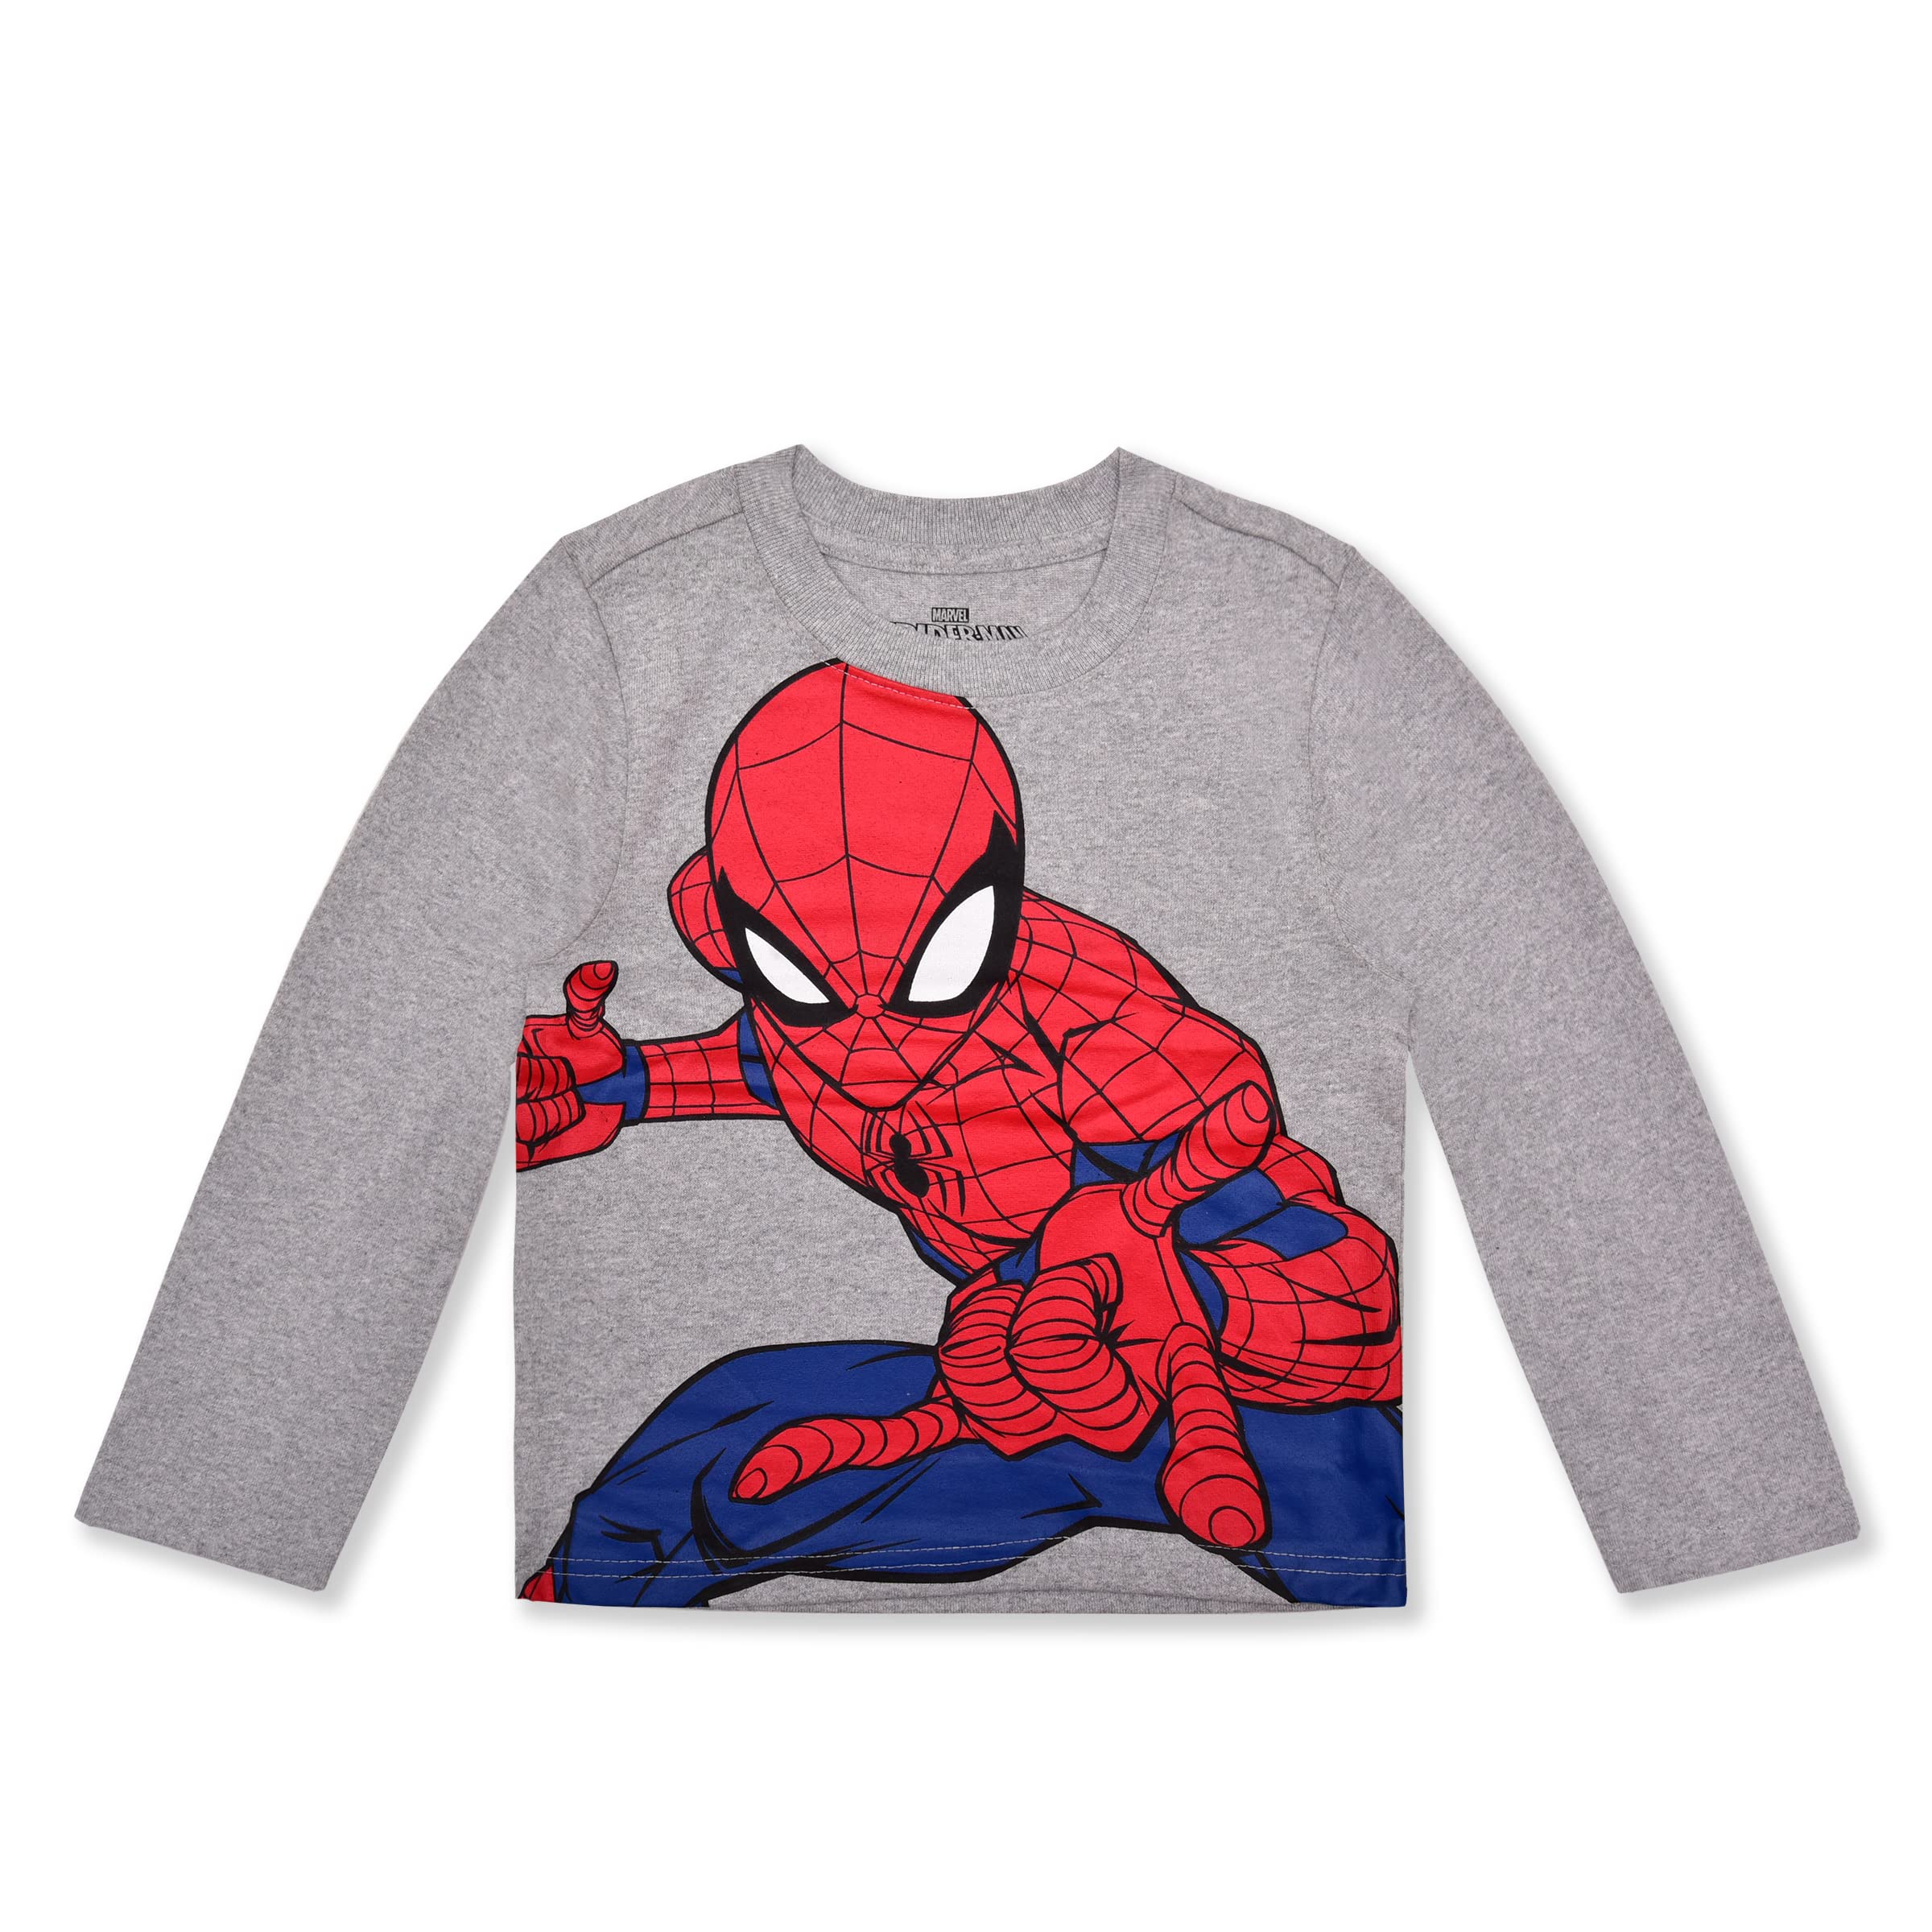 Marvel Spiderman Boys Long Sleeve Shirt and Jogger Set for Toddler and Little Kids – Red/Grey